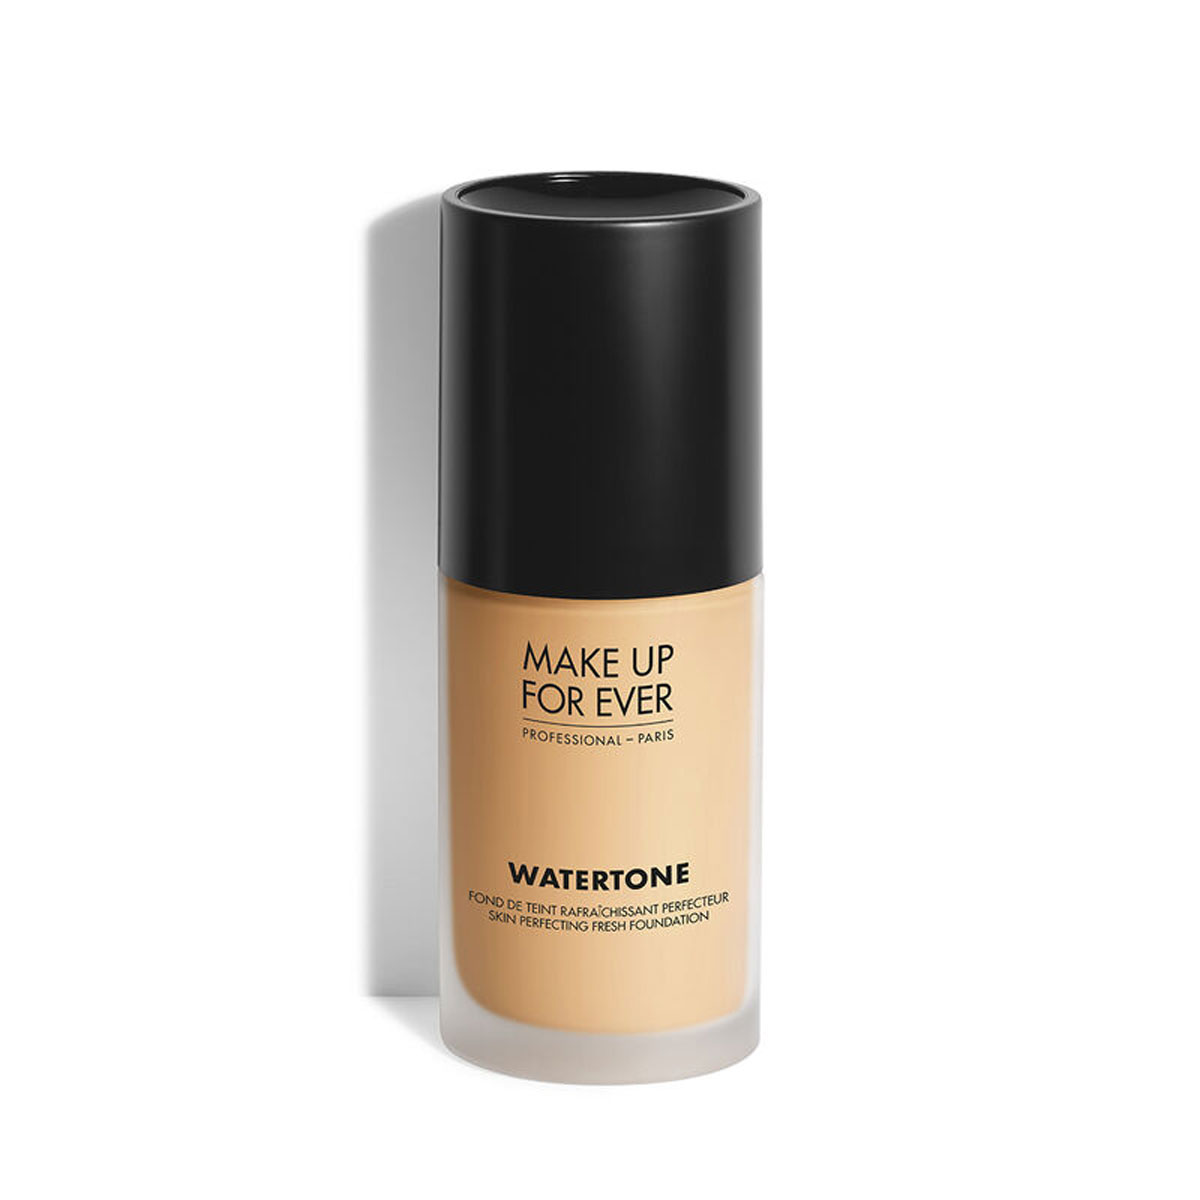 Make Up For Ever Watertone - Transfert-Proof Foundation, Natural Radiant Finish Y225 - Marble (40 Ml